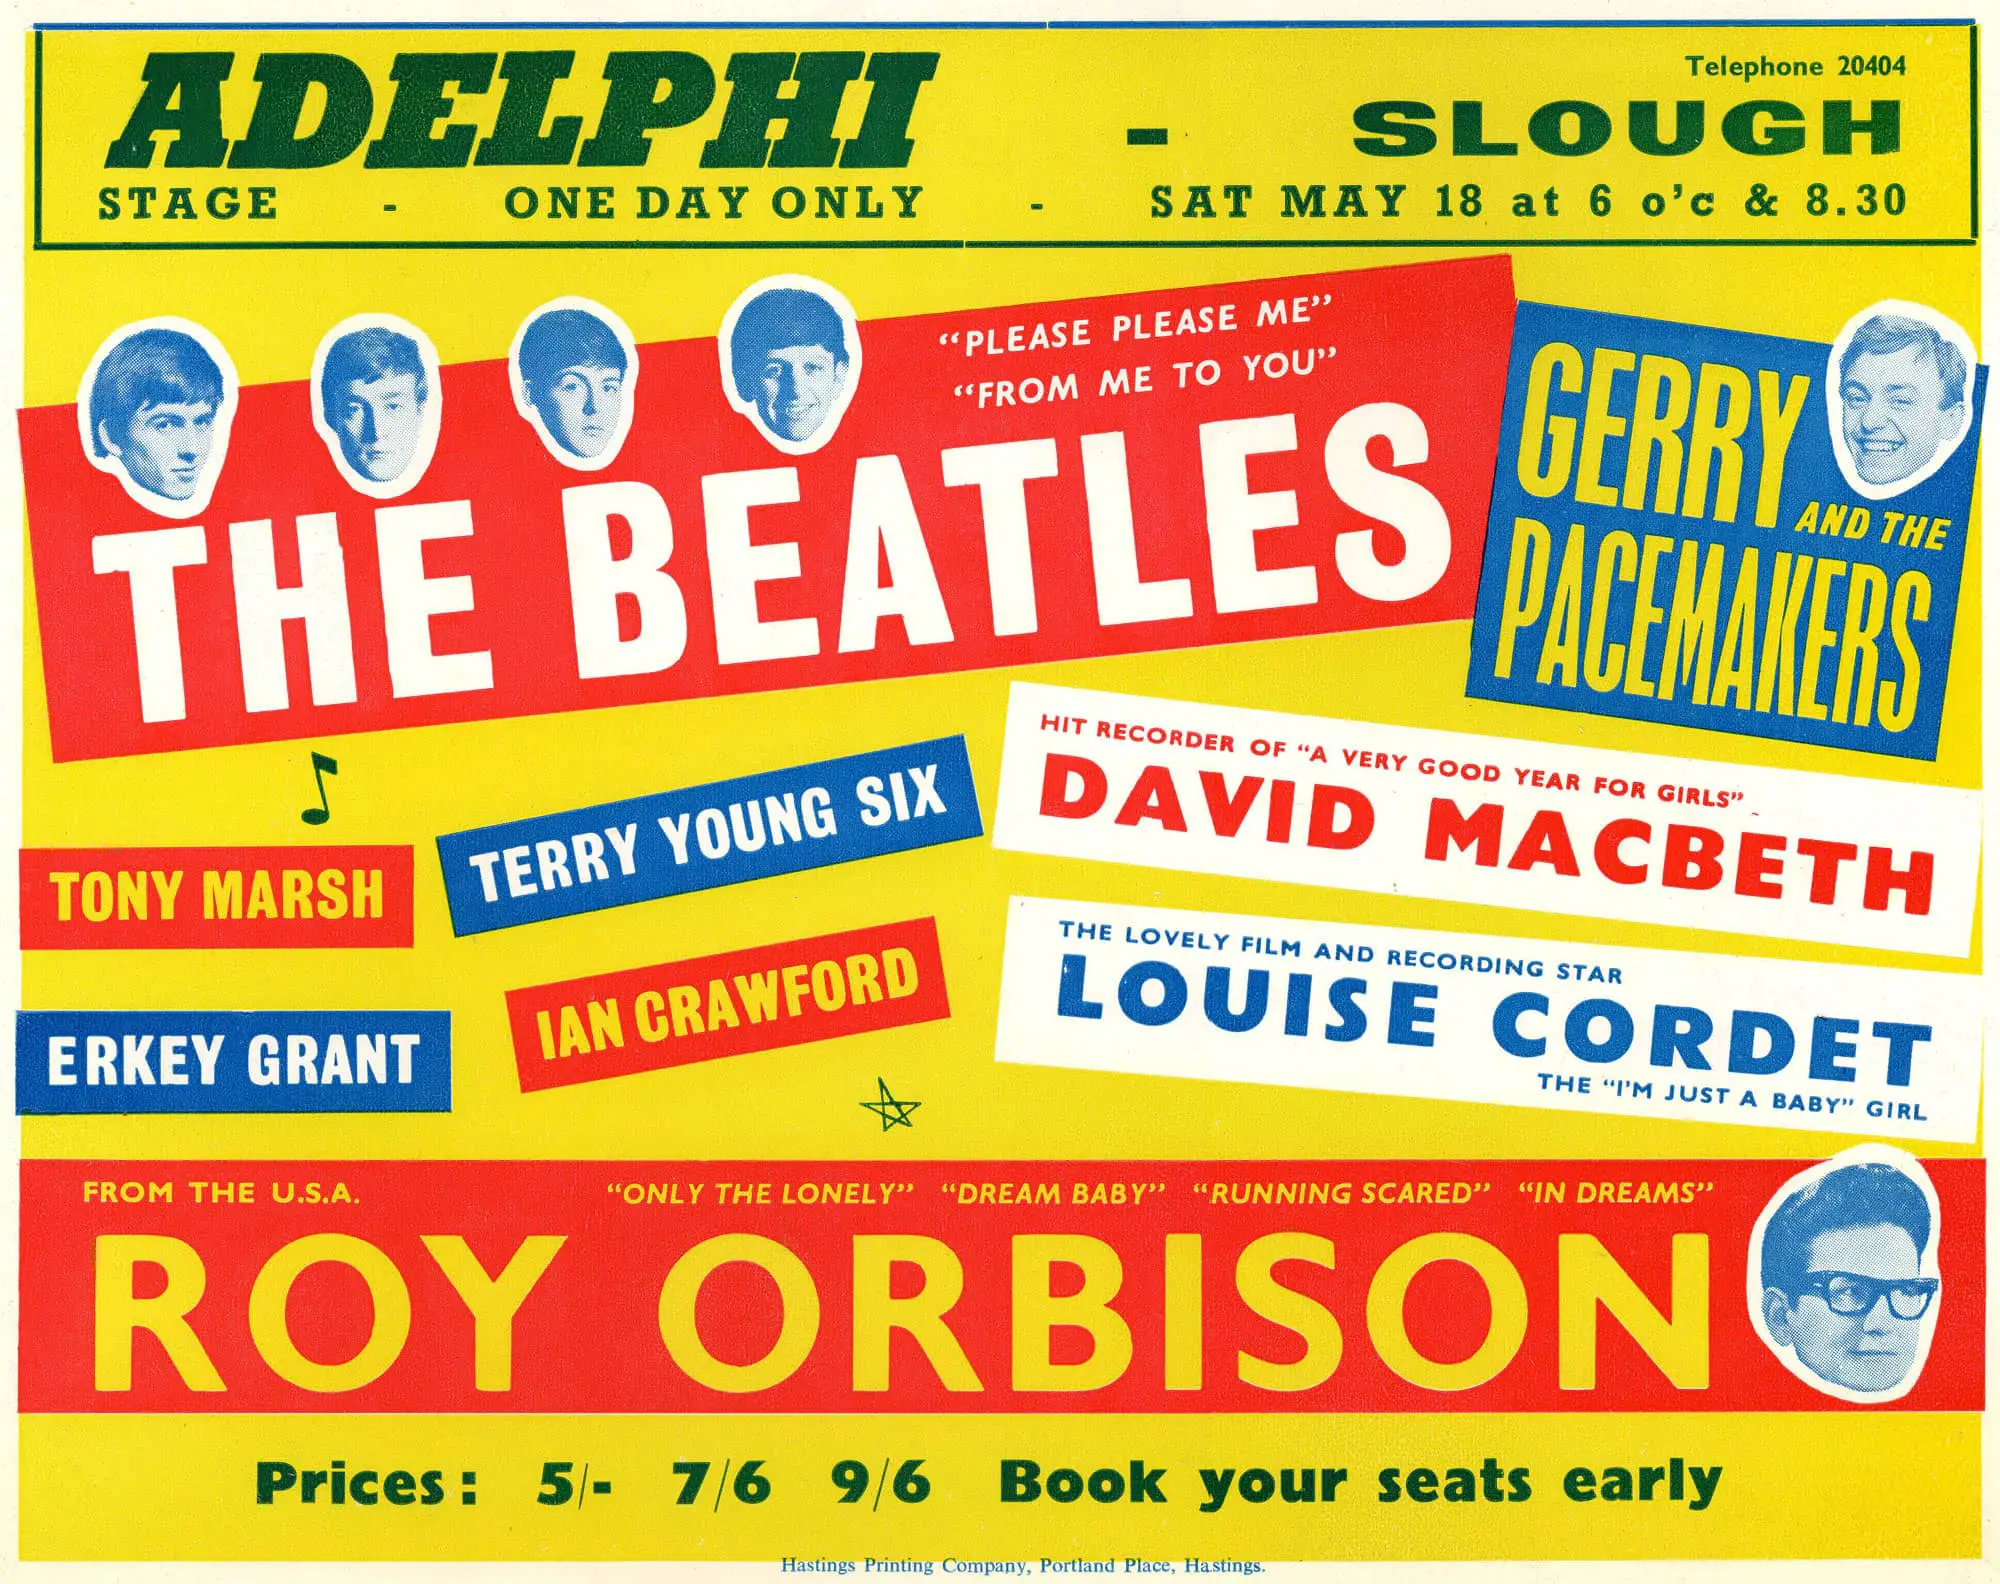 The 1963 Tour That Catapulted The Beatles into Stardom